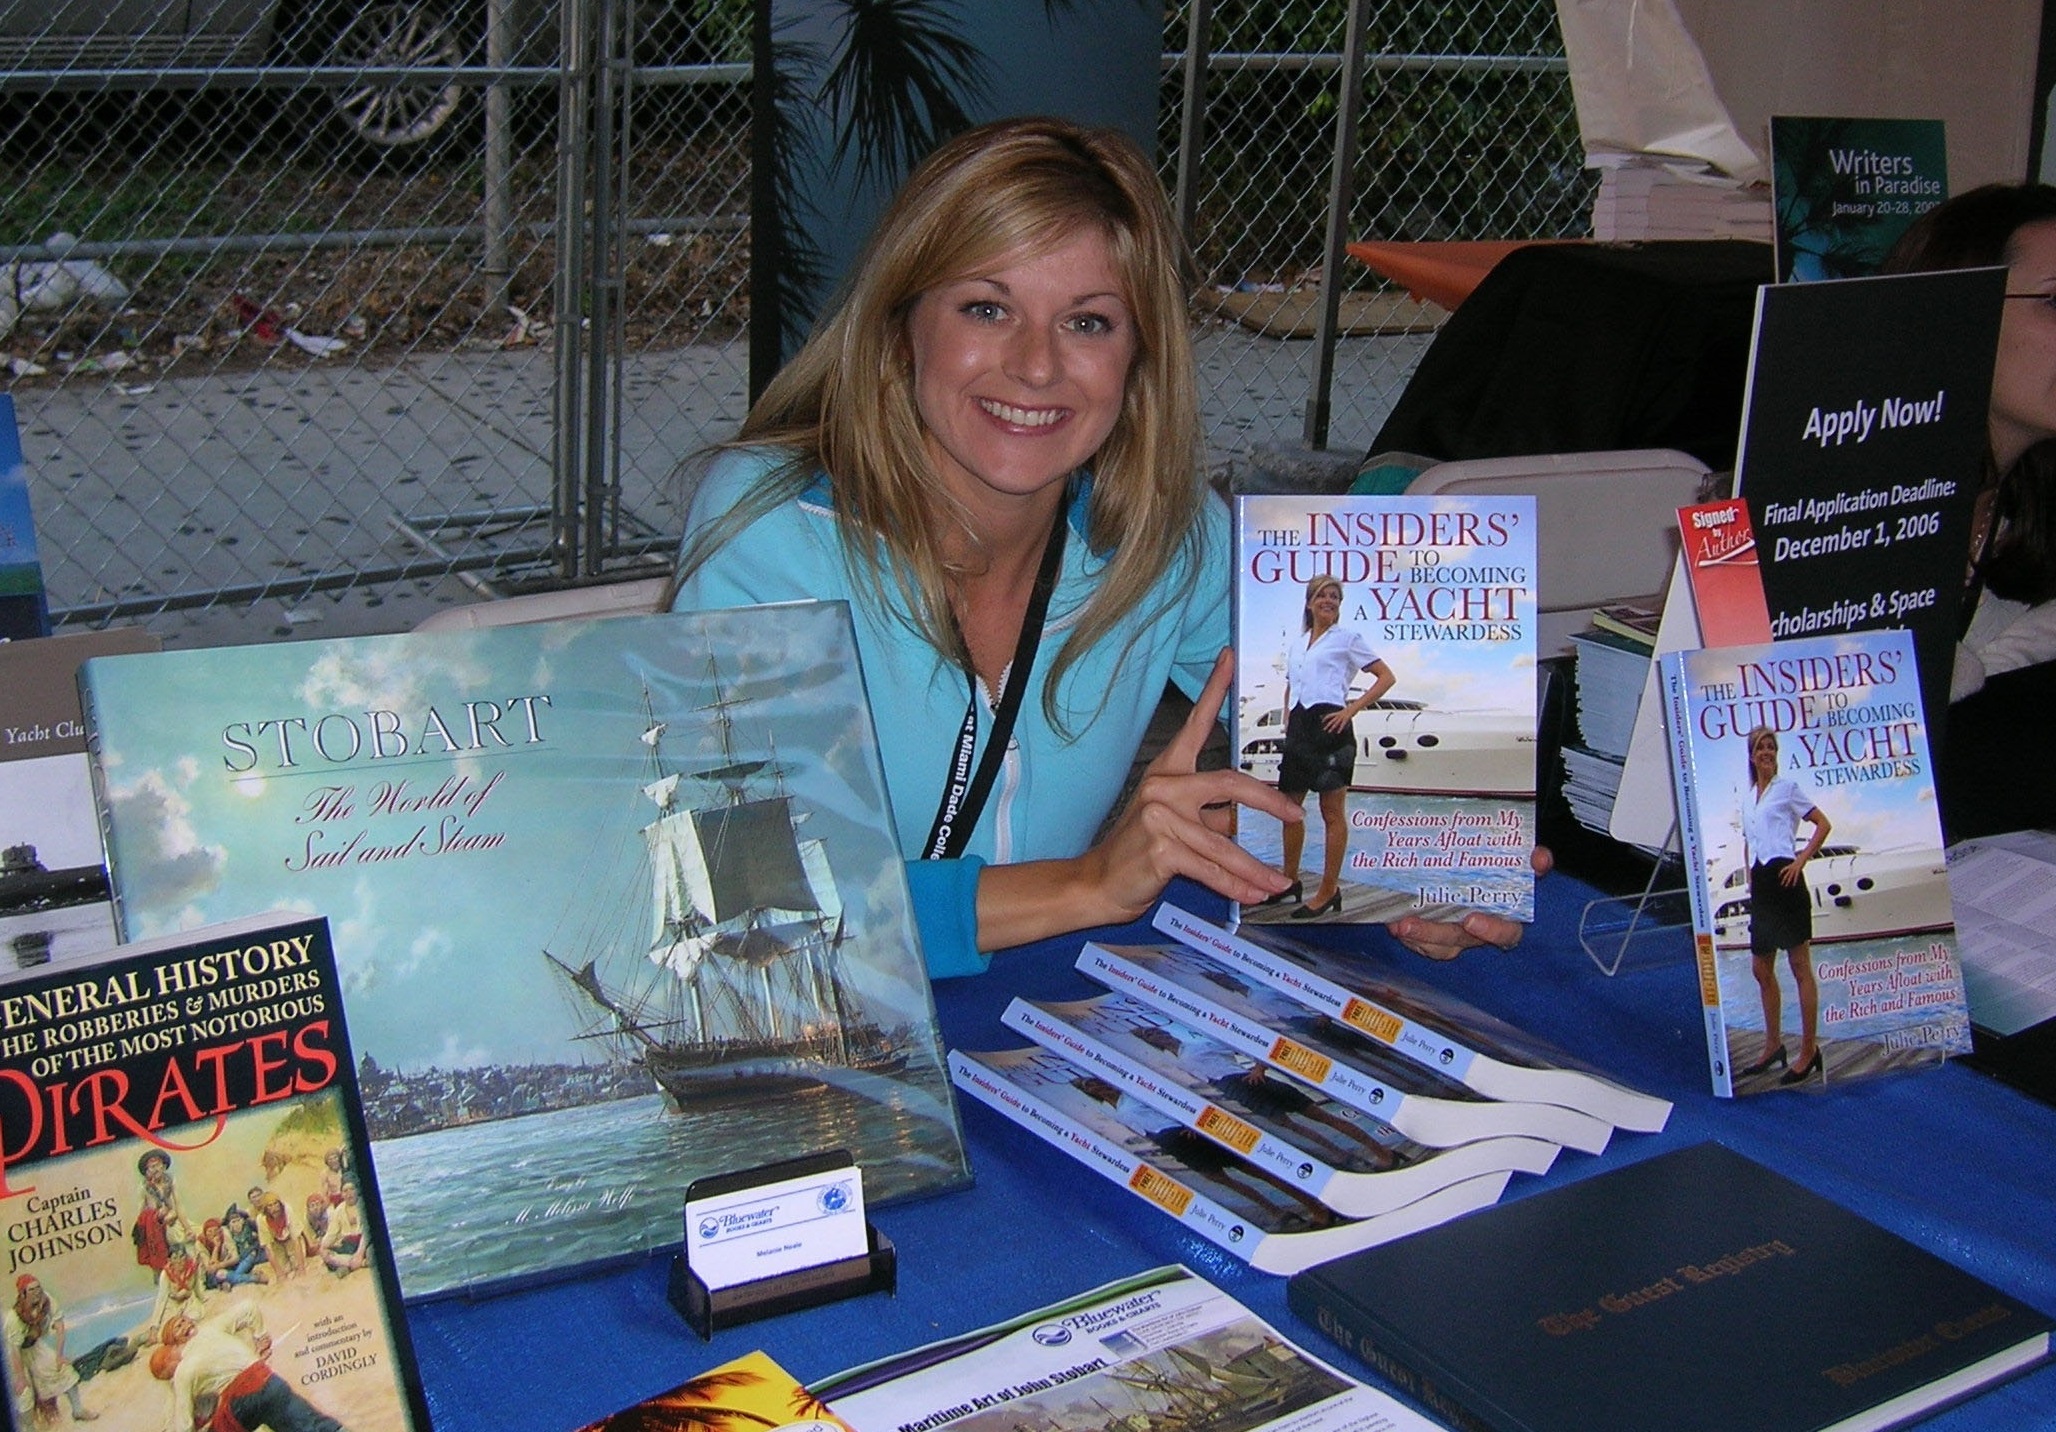  - Julie-Perry-at-Miami-Book-Fair-2006-1st-Edition-The-Insiders-Guide-to-Becoming-a-Yacht-Stewardess-Cropped